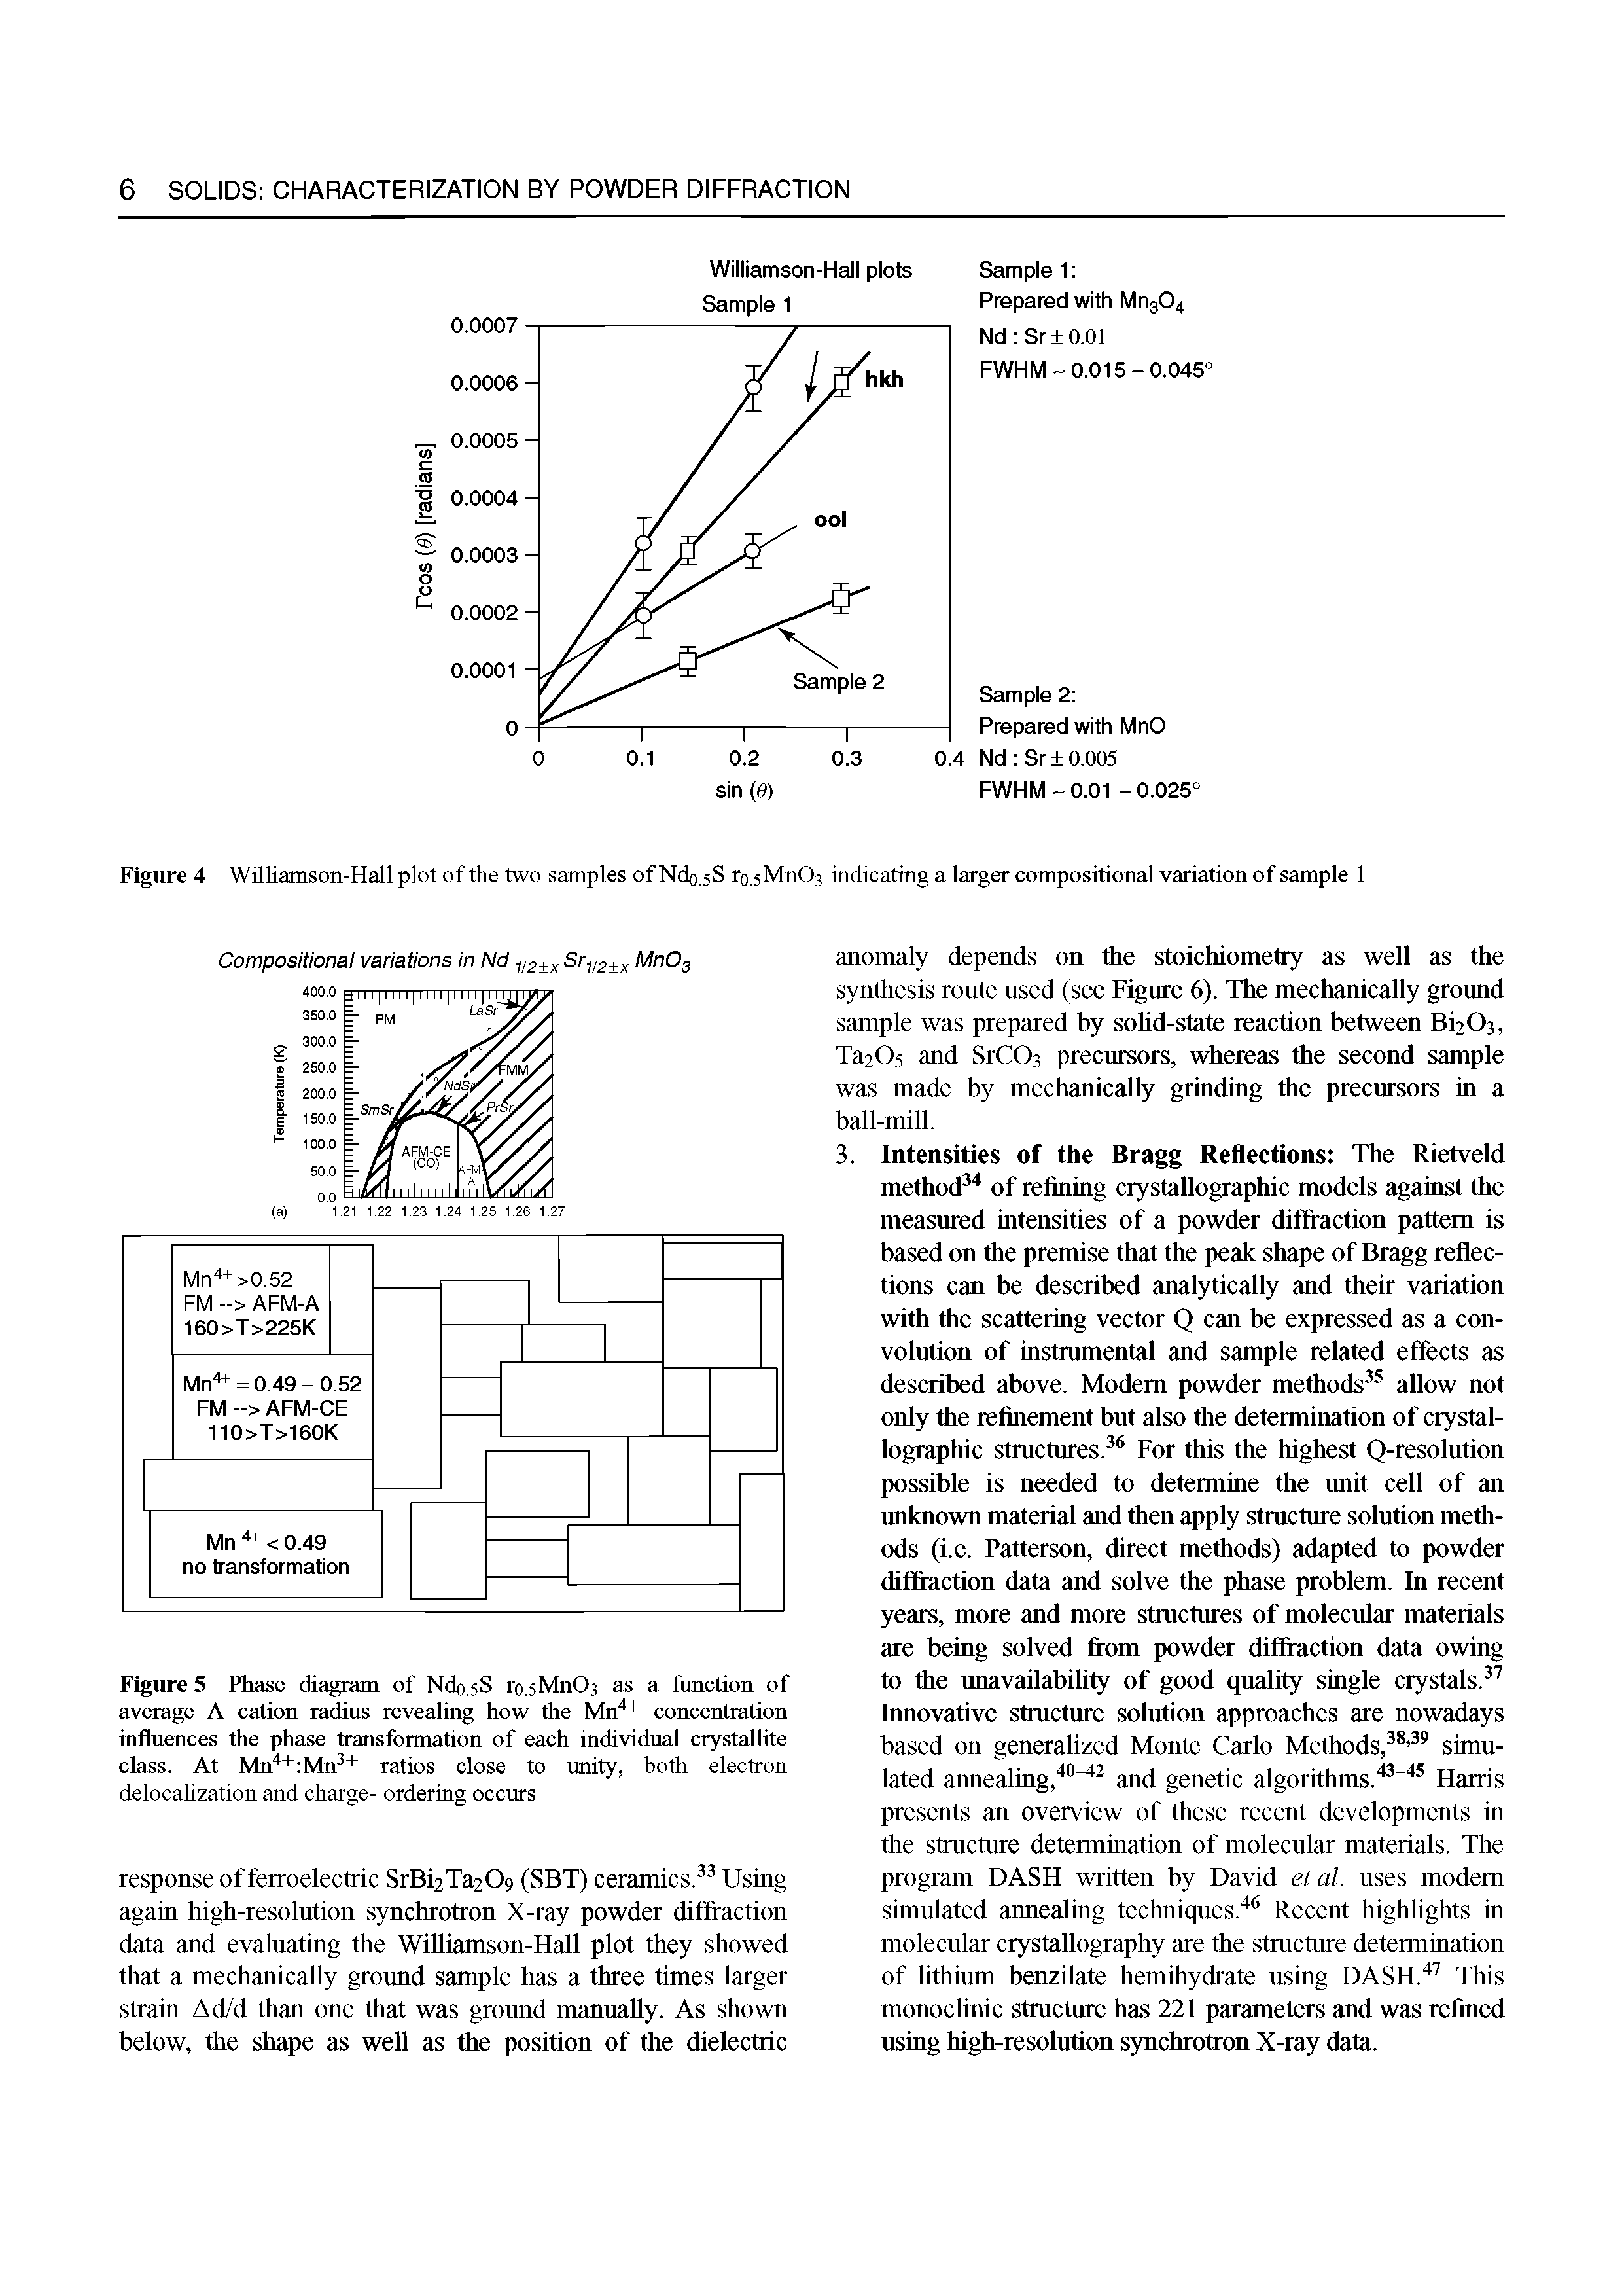 Figure 5 Phase diagram of Ndo.sS ro.sMnOs as a function of average A cation radius revealing how the Mn + concentration influences the phase transformation of each individual crystallite class. At Mn + Mn + ratios close to unity, both electron delocalization and charge- ordering occurs...